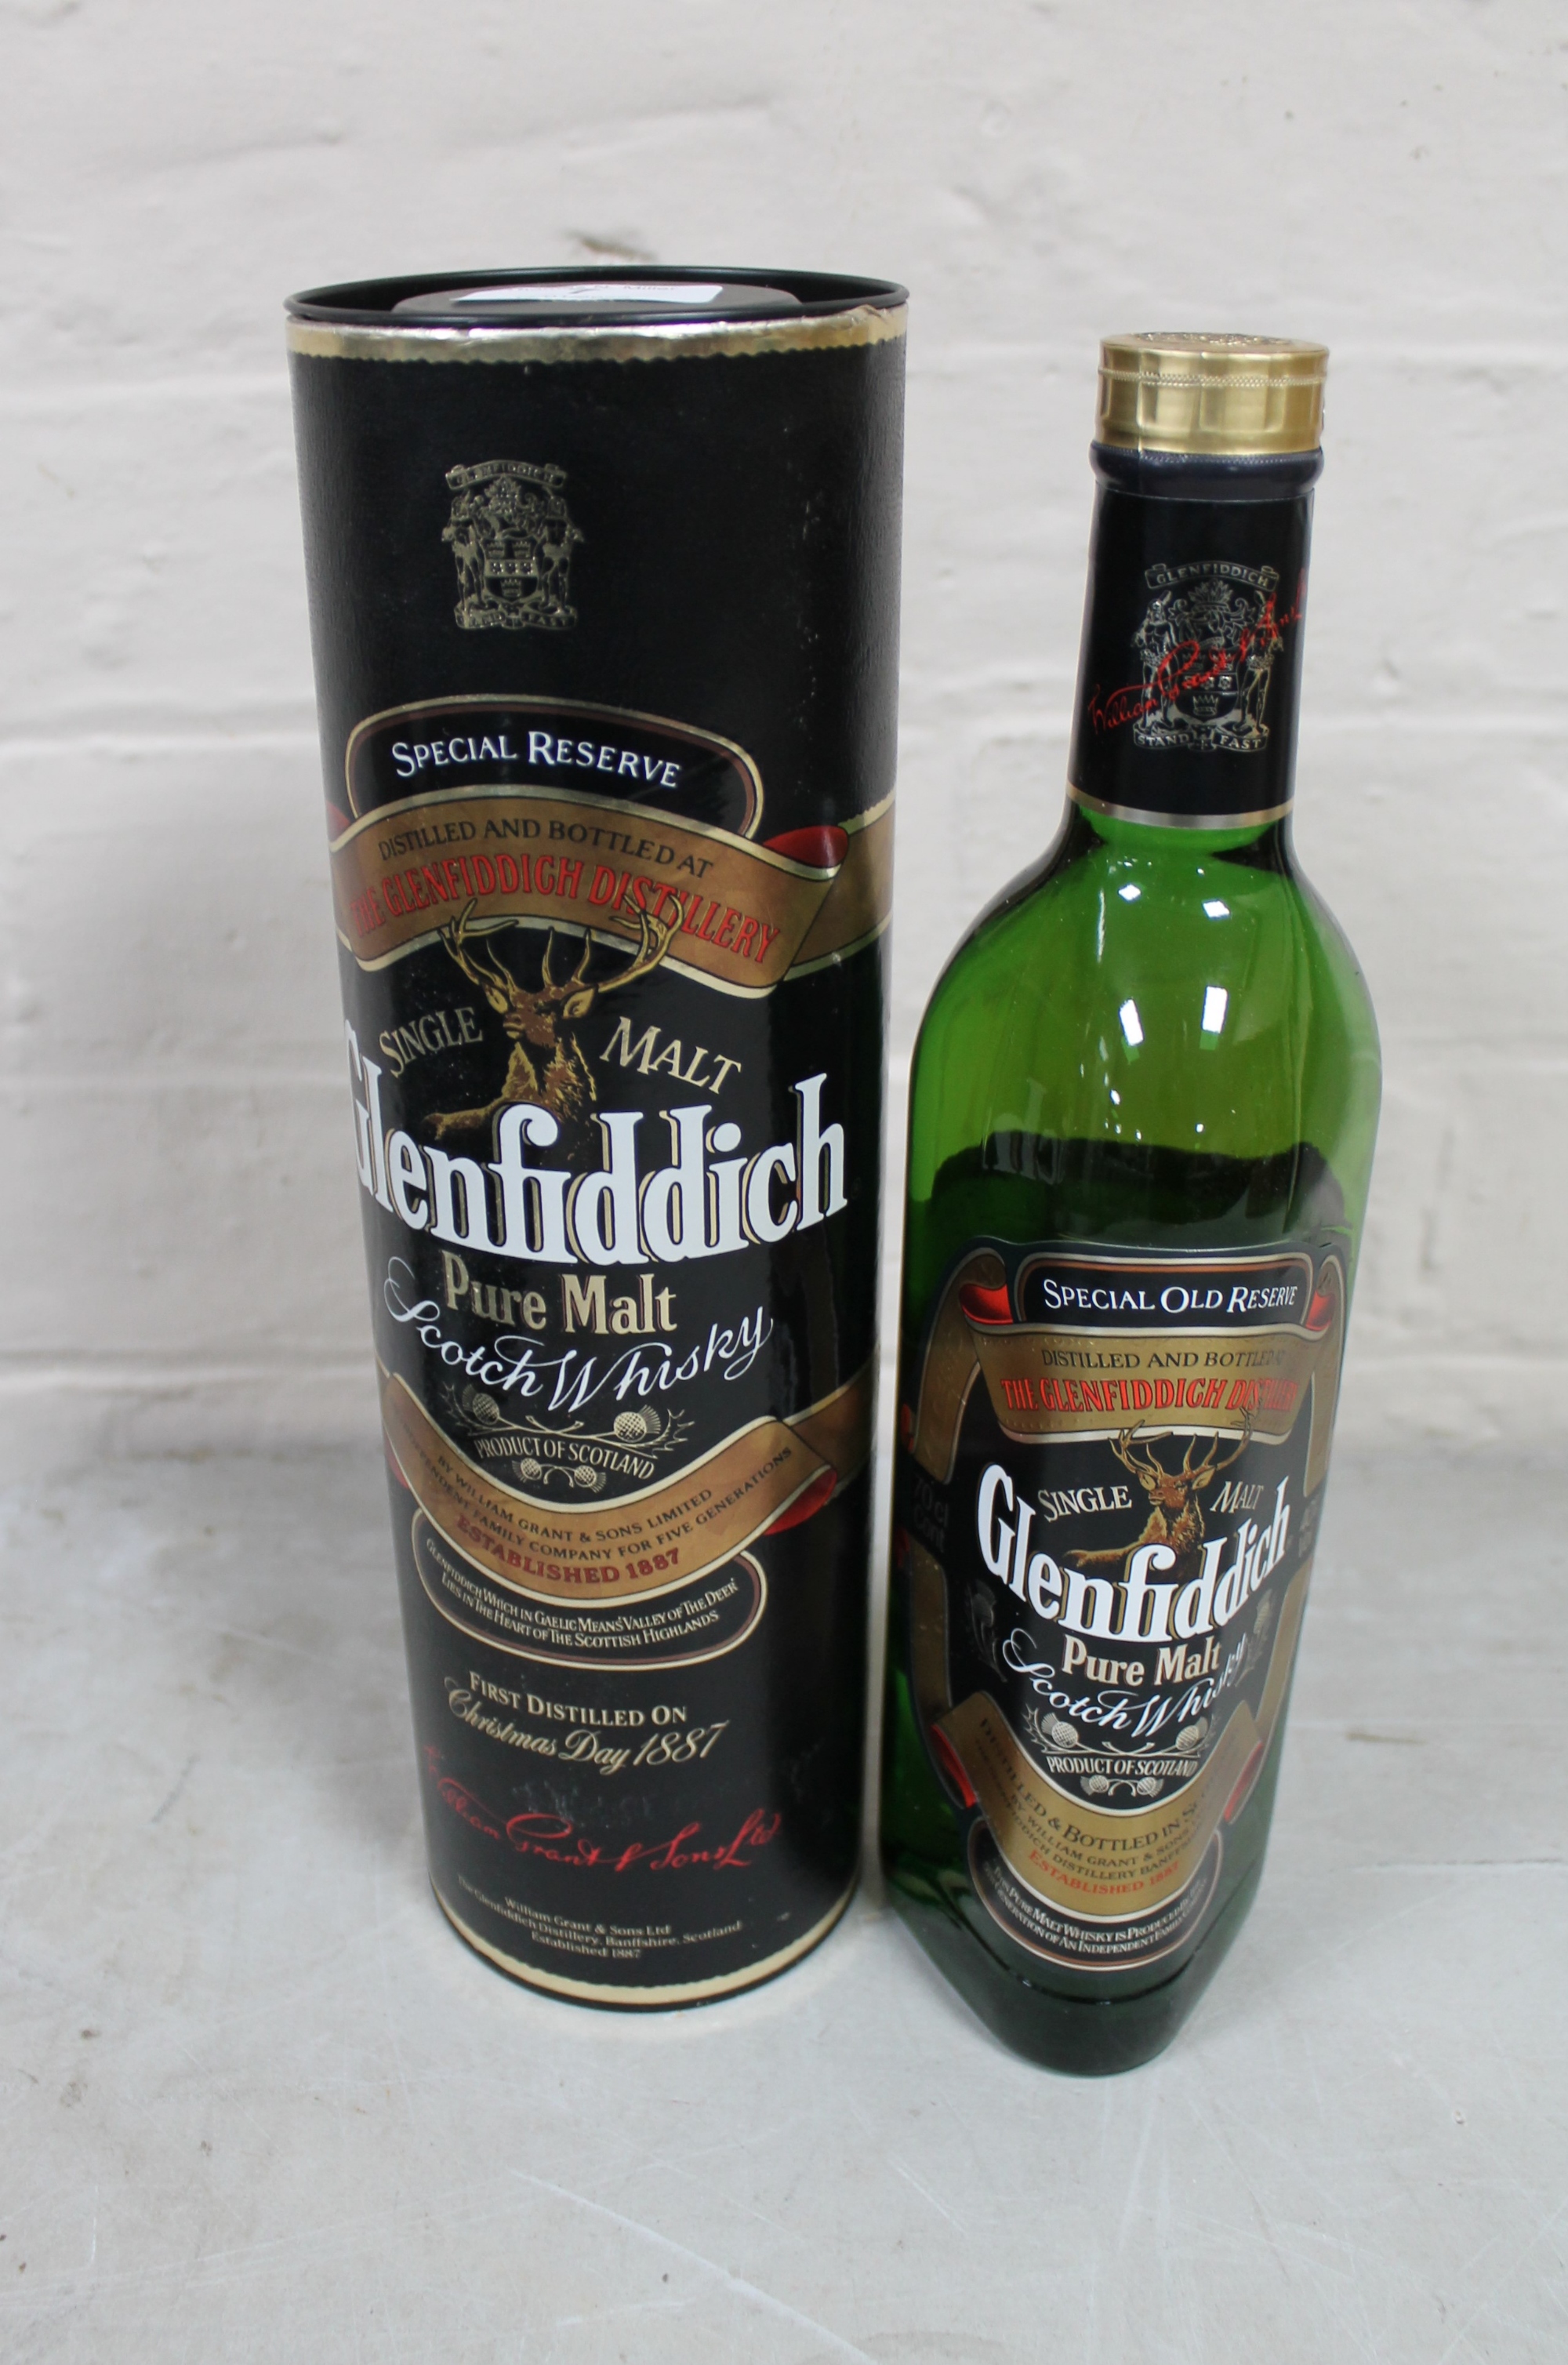 A 70cl bottle of Glenfiddich pure malt Scotch whisky, Special Old Reserve,